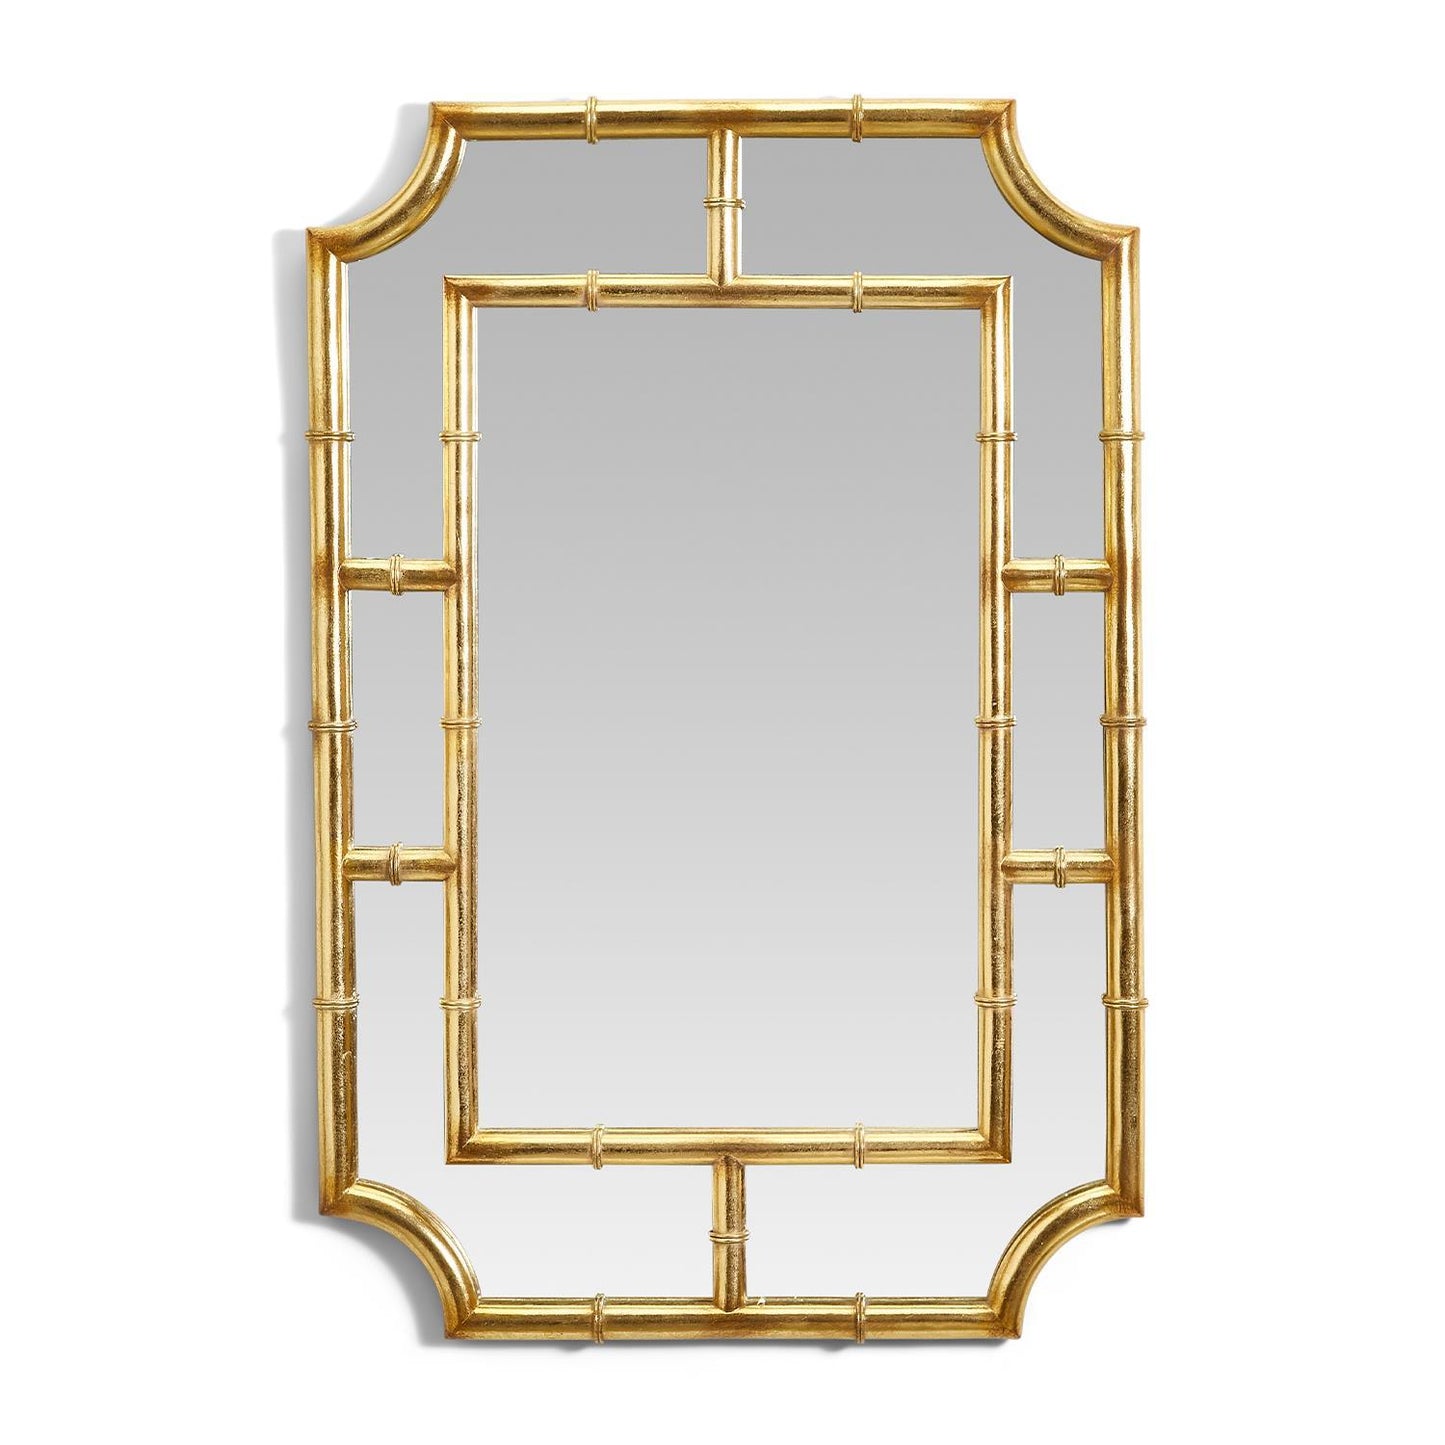 Two's Company Golden Bamboo Wall Mirror, 30"x20"